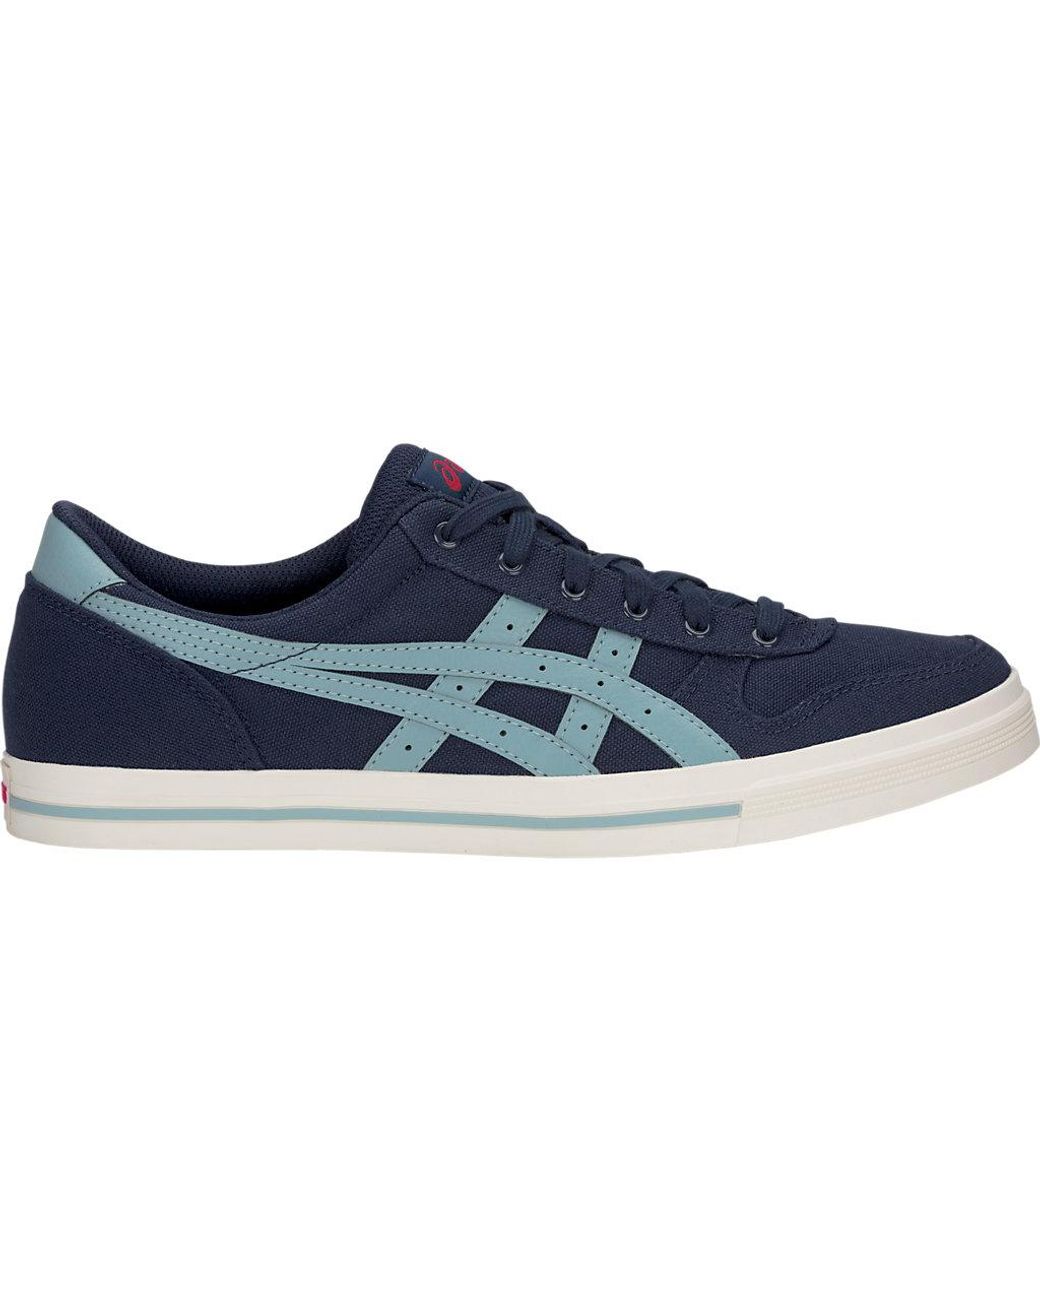 Asics Aaron in Blue for Men - Save 55% - Lyst